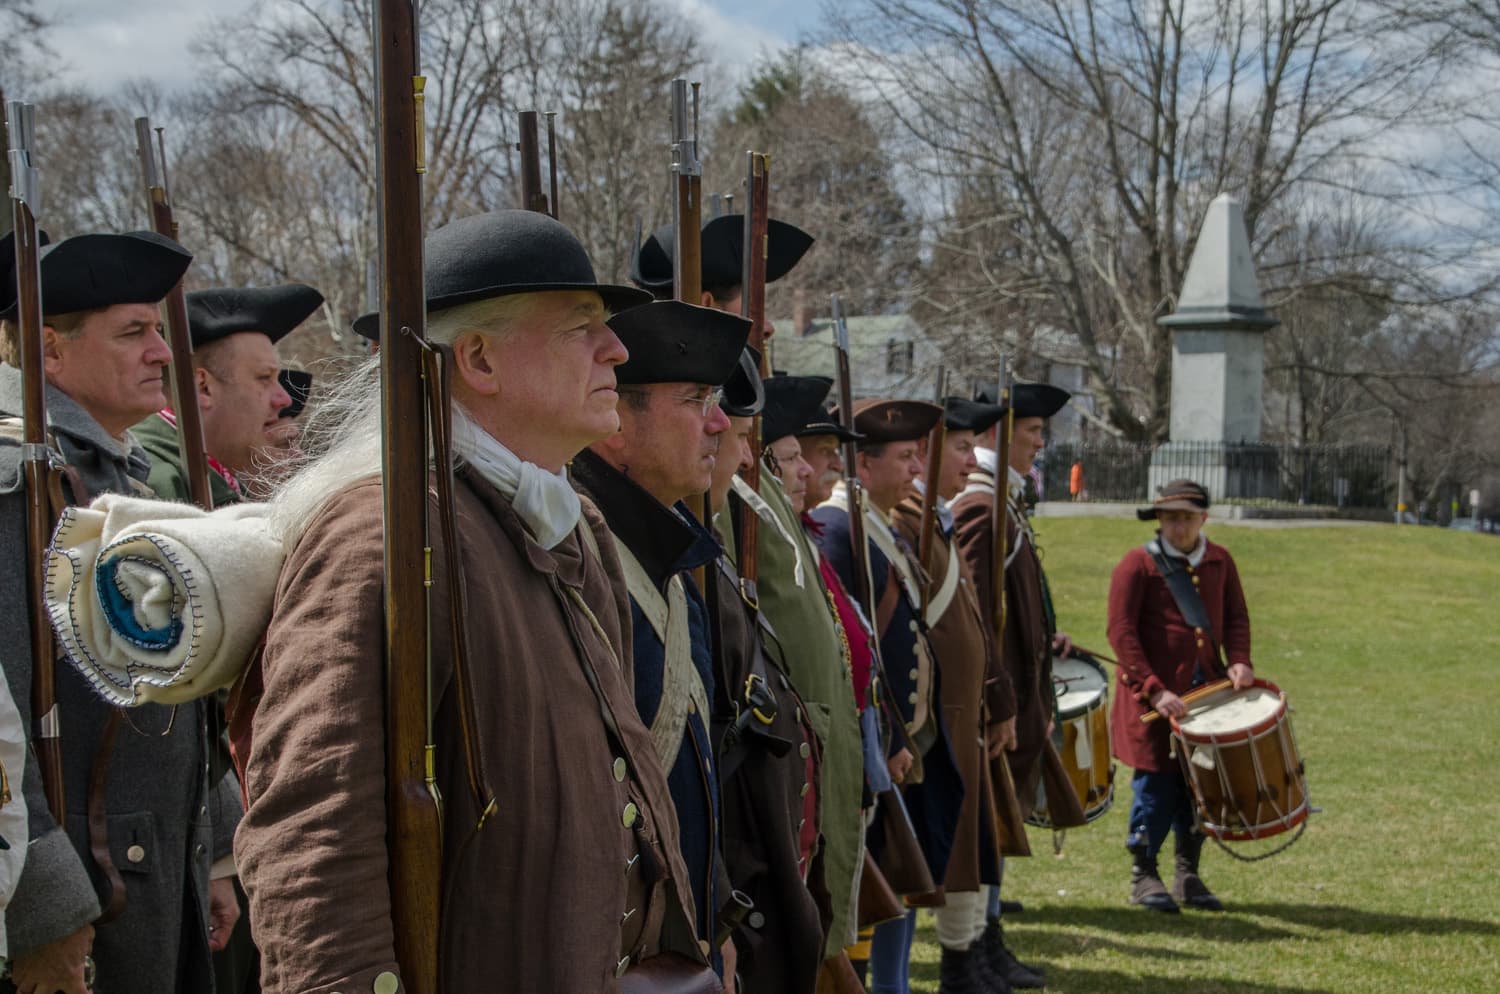 The 2018 Lexington Minute Men assemble near the monument commemorating the men who died on the green in 1775. (Sharon Brody/WBUR)